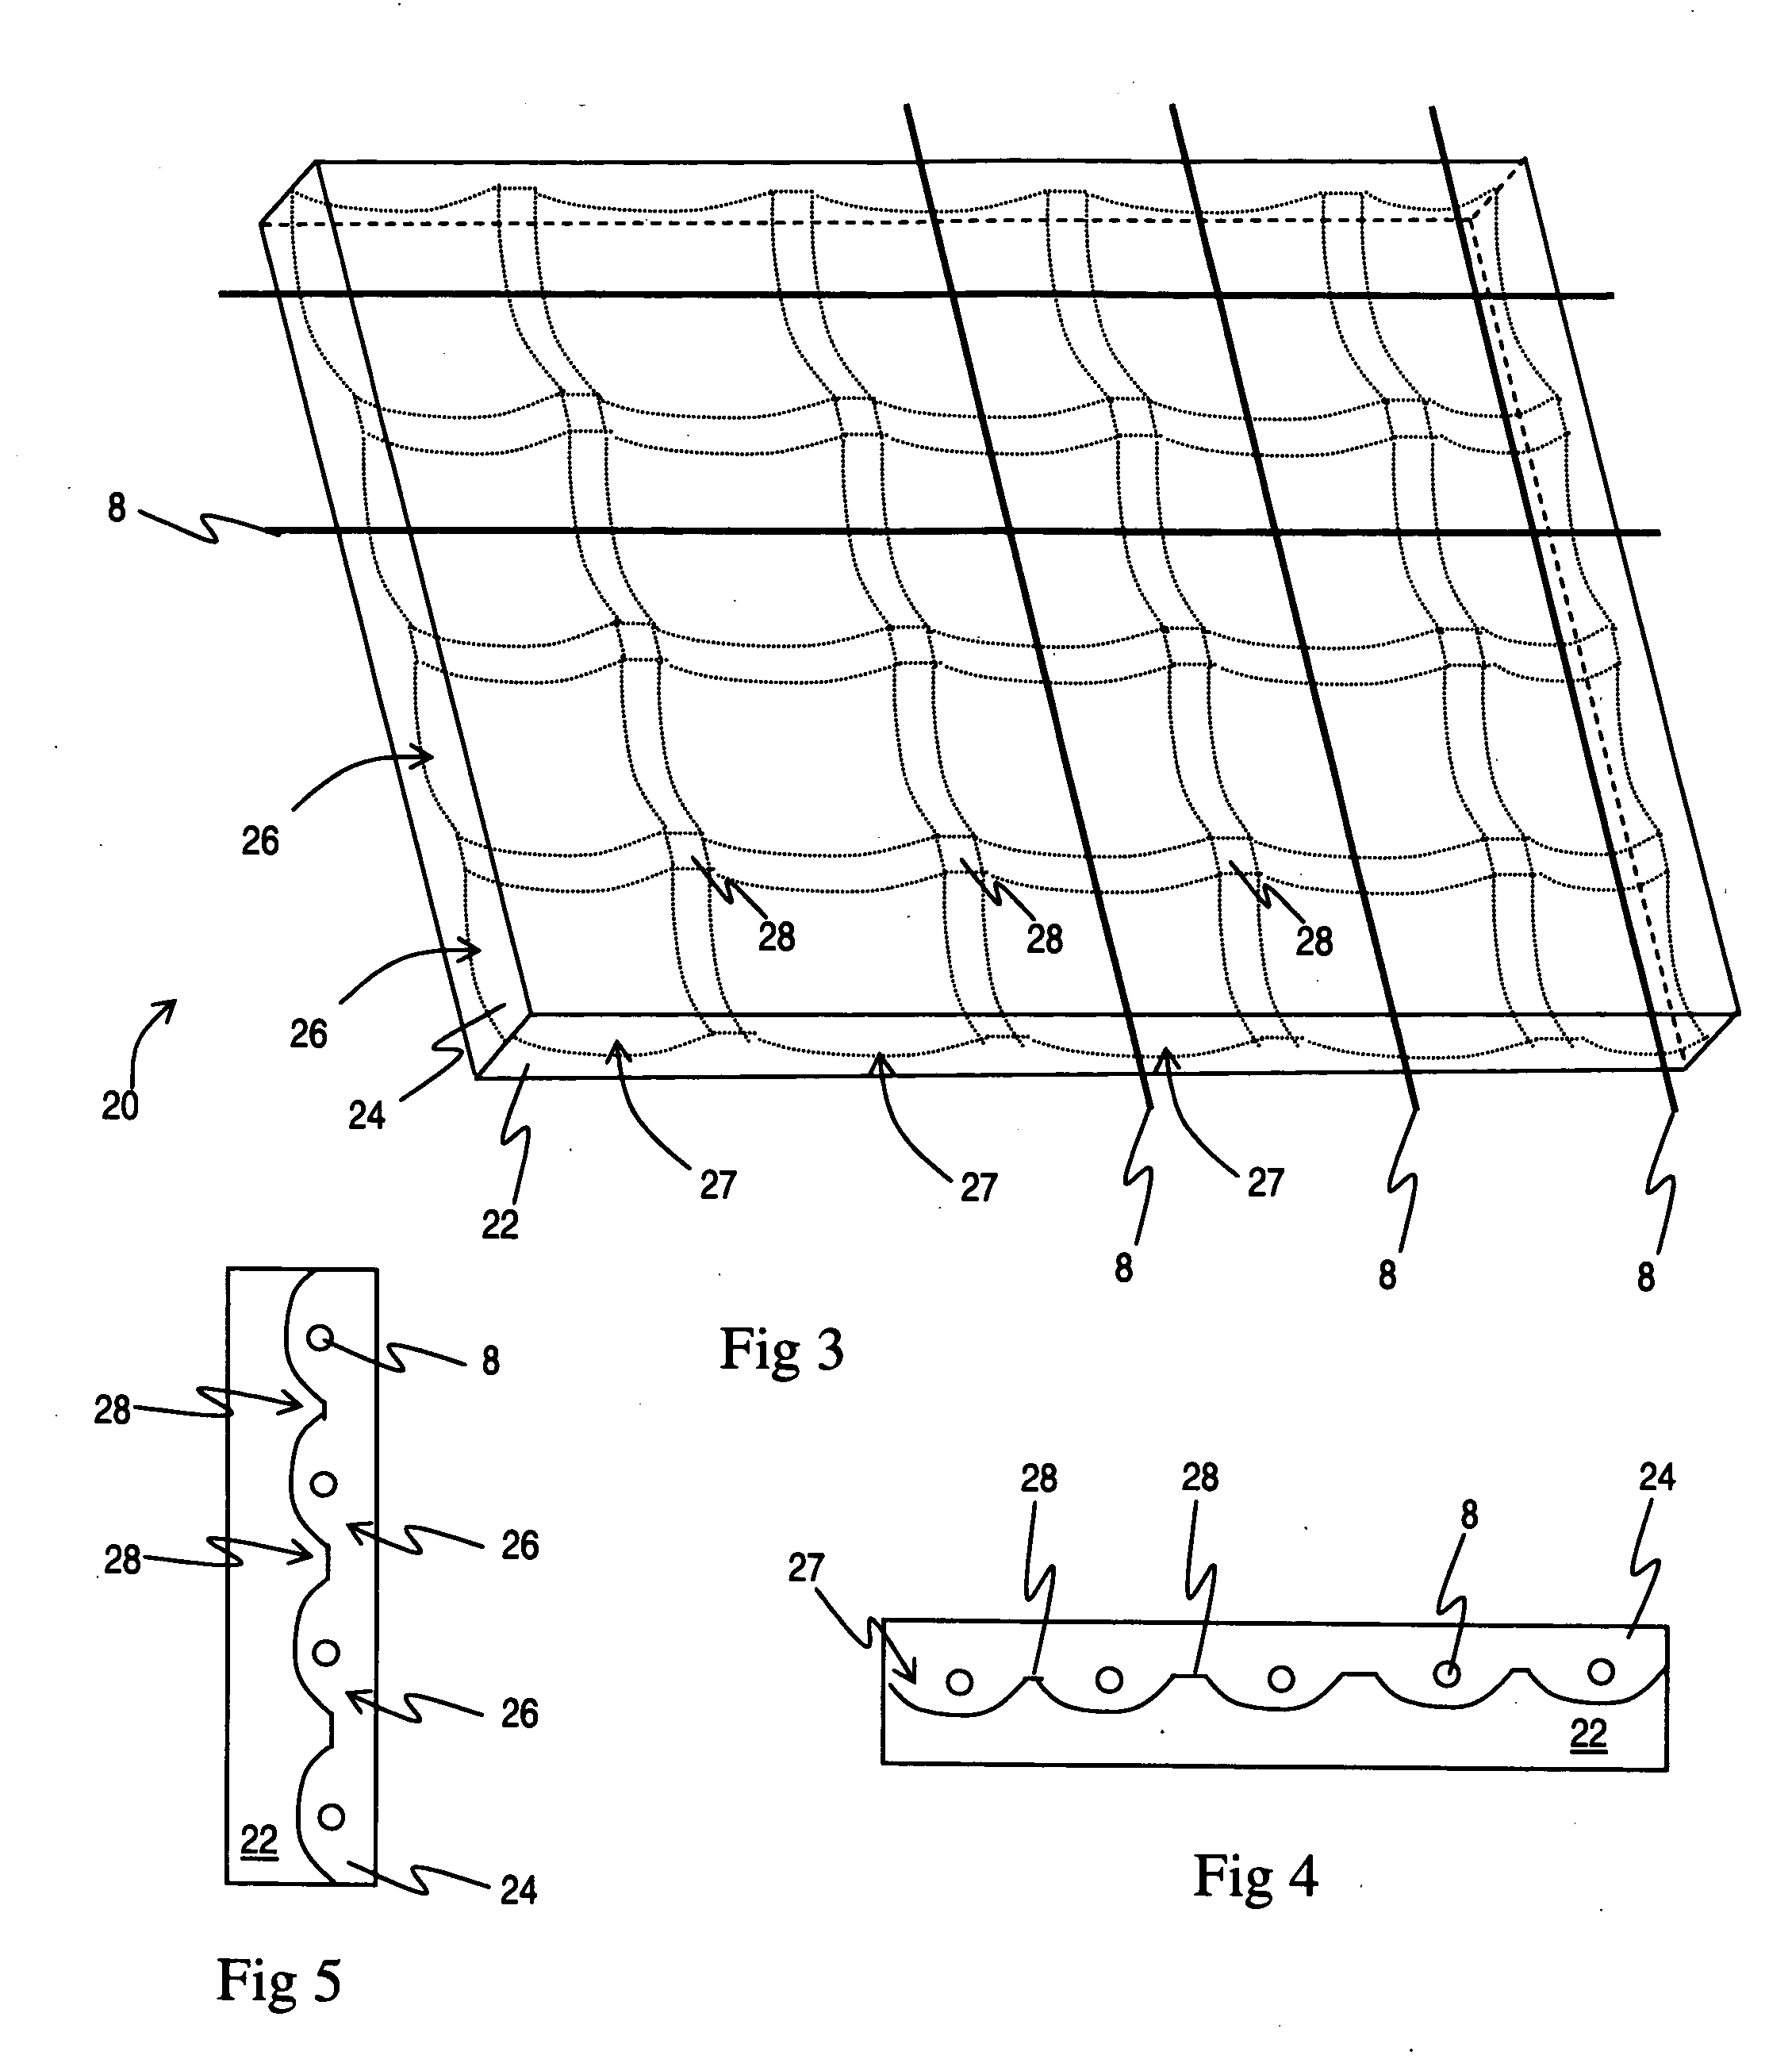 Hybrid insulating reinforced concrete system